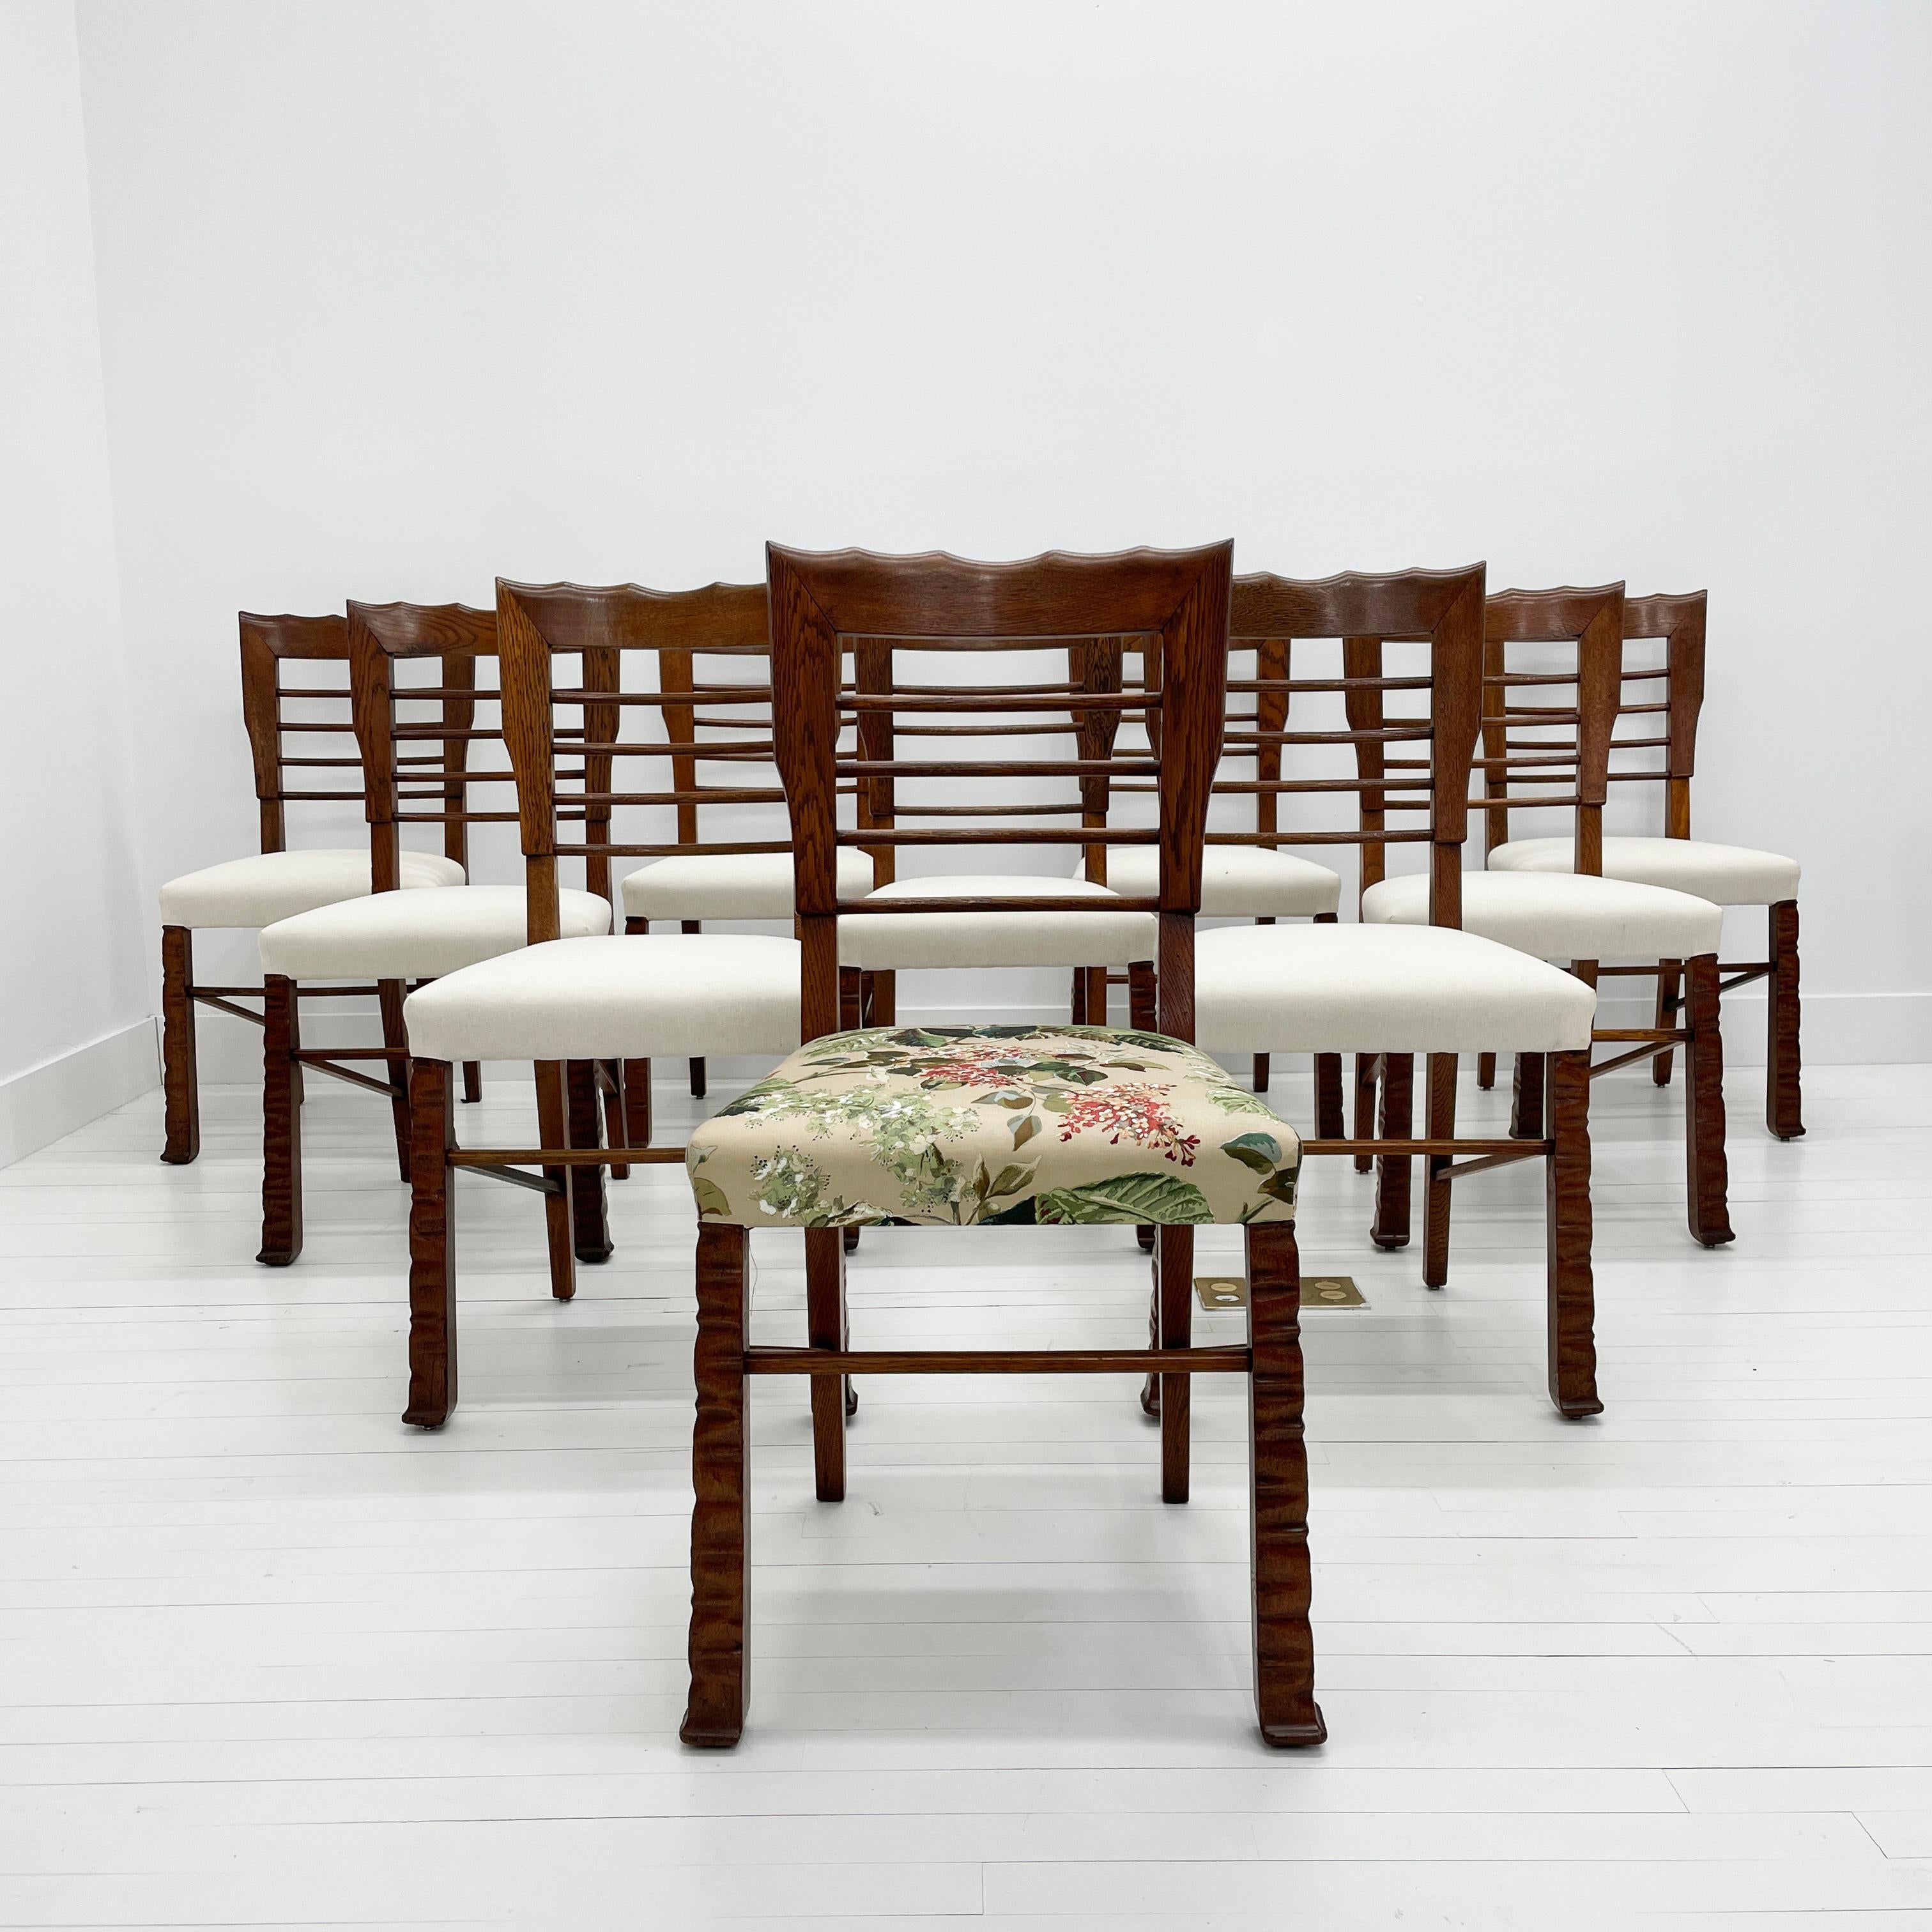 Vittorio Valabrega Rustic Primitive Dining Chairs, Set of 10, 1940's

Rare set of rustic Deco chairs. Their appearance is both heavy and light thanks to the ladder back. Carved in Oak, the ladder back terminates in a well delineated chamfered